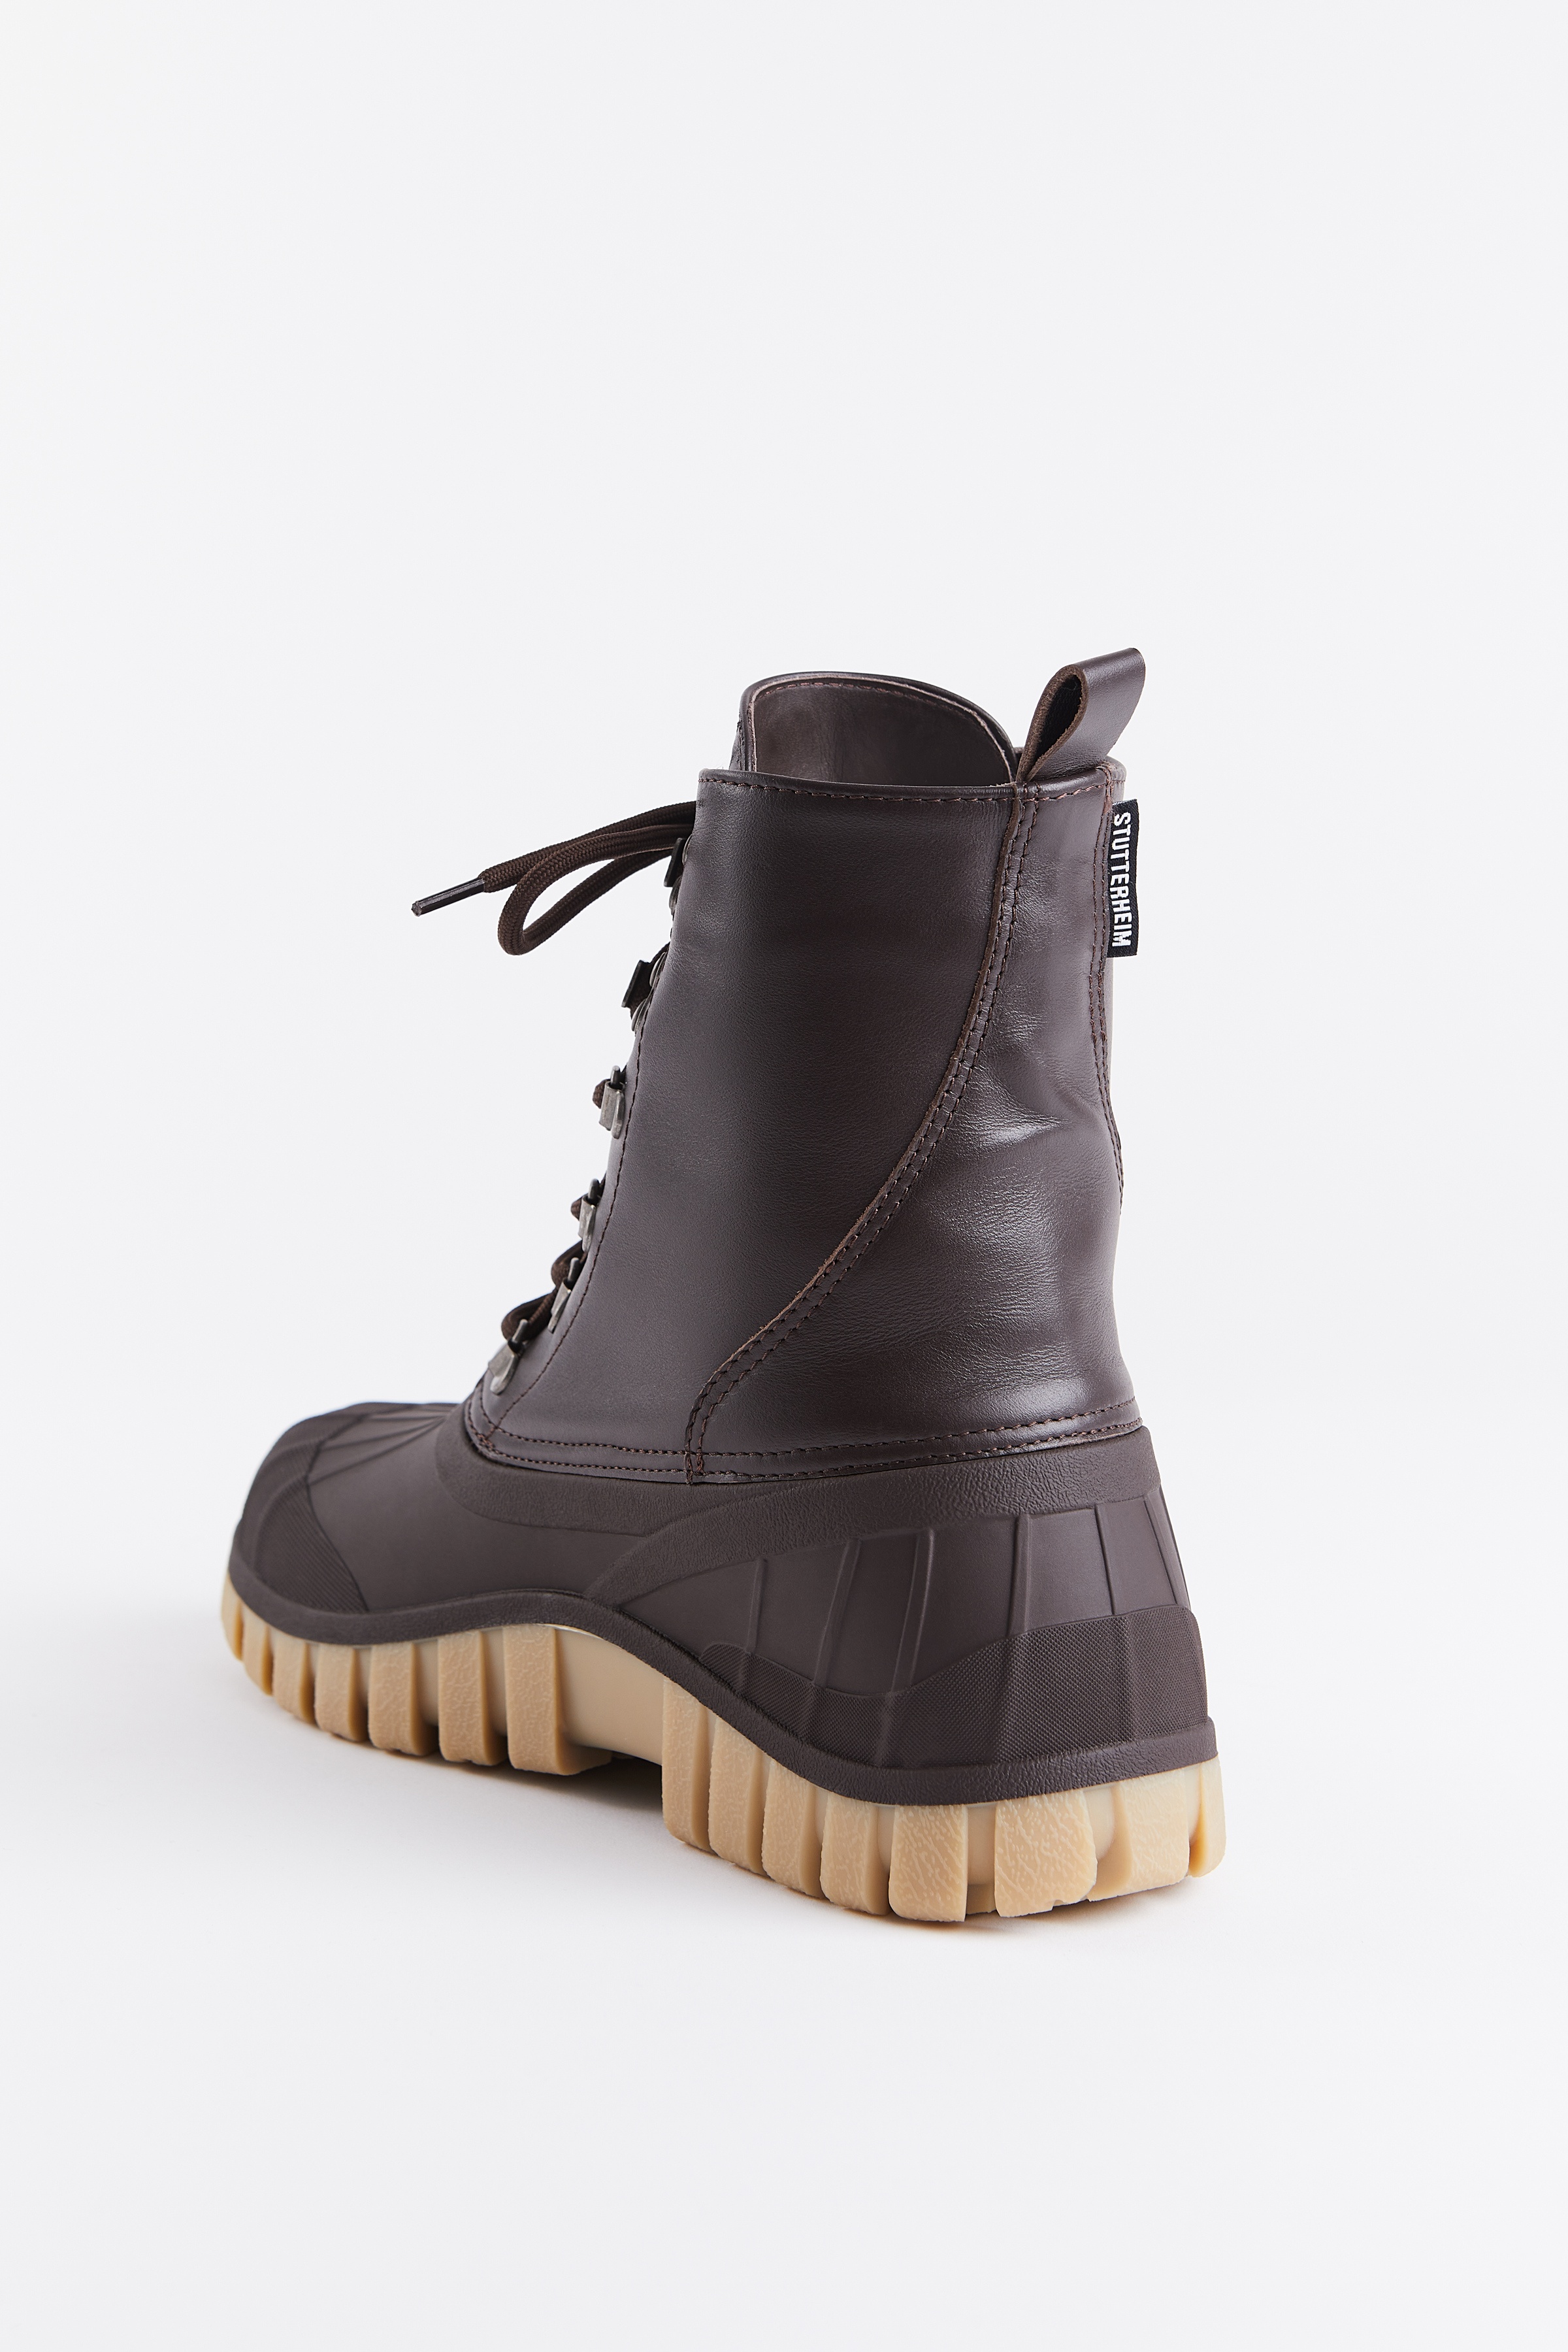 Patrol Boot Leather Coffee - 2